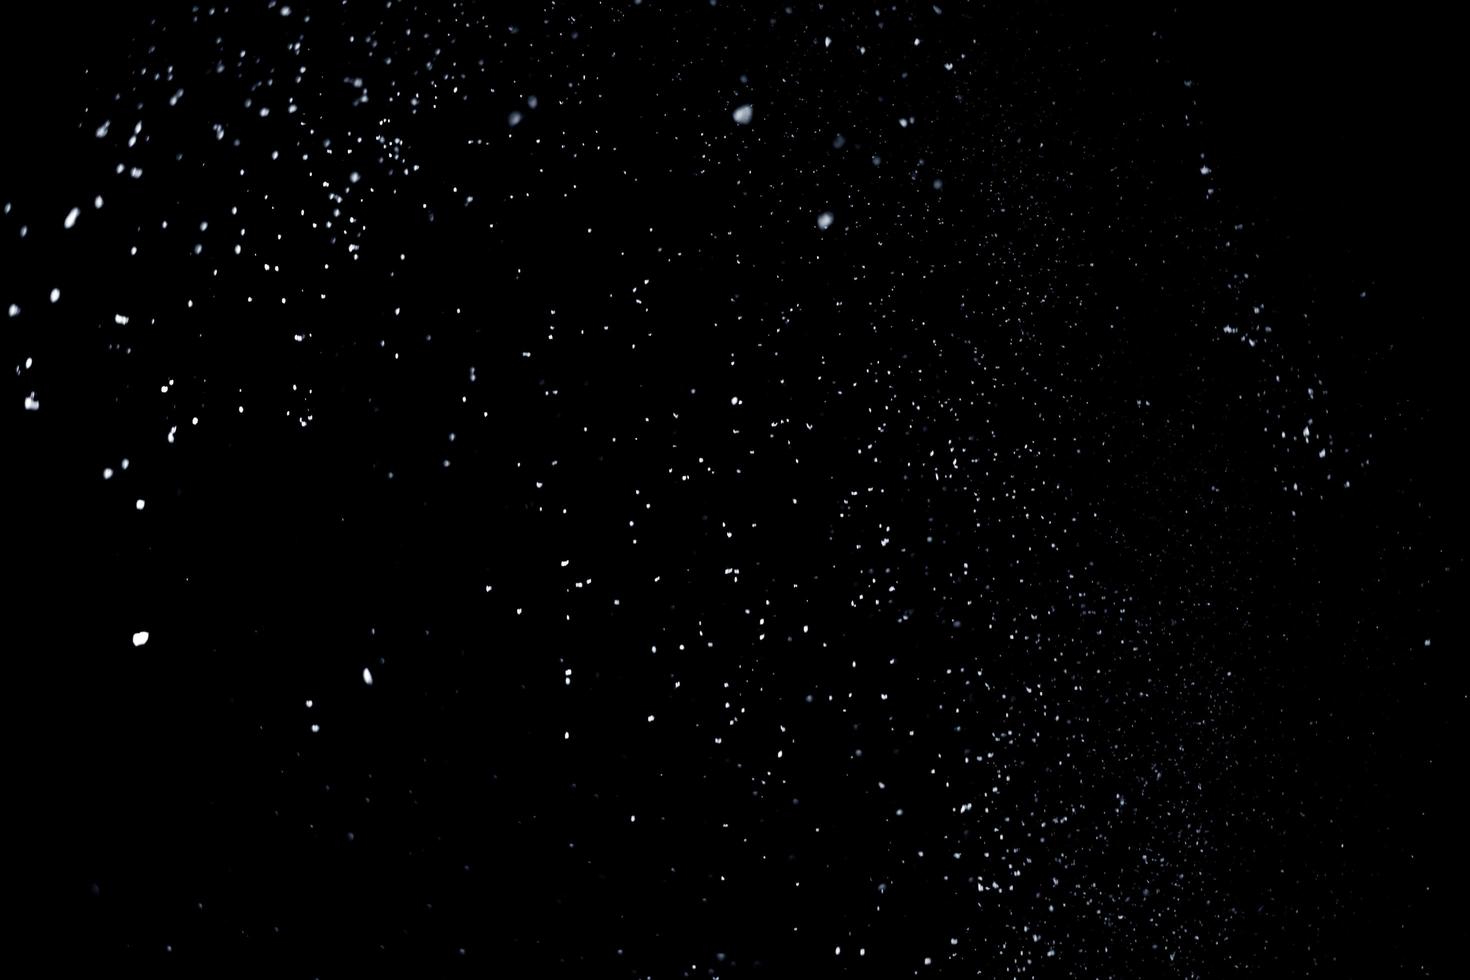 the white particles on black background representing a snowfall. Snow overlay footage for giving a freezing or winter effect to the video presentation. photo